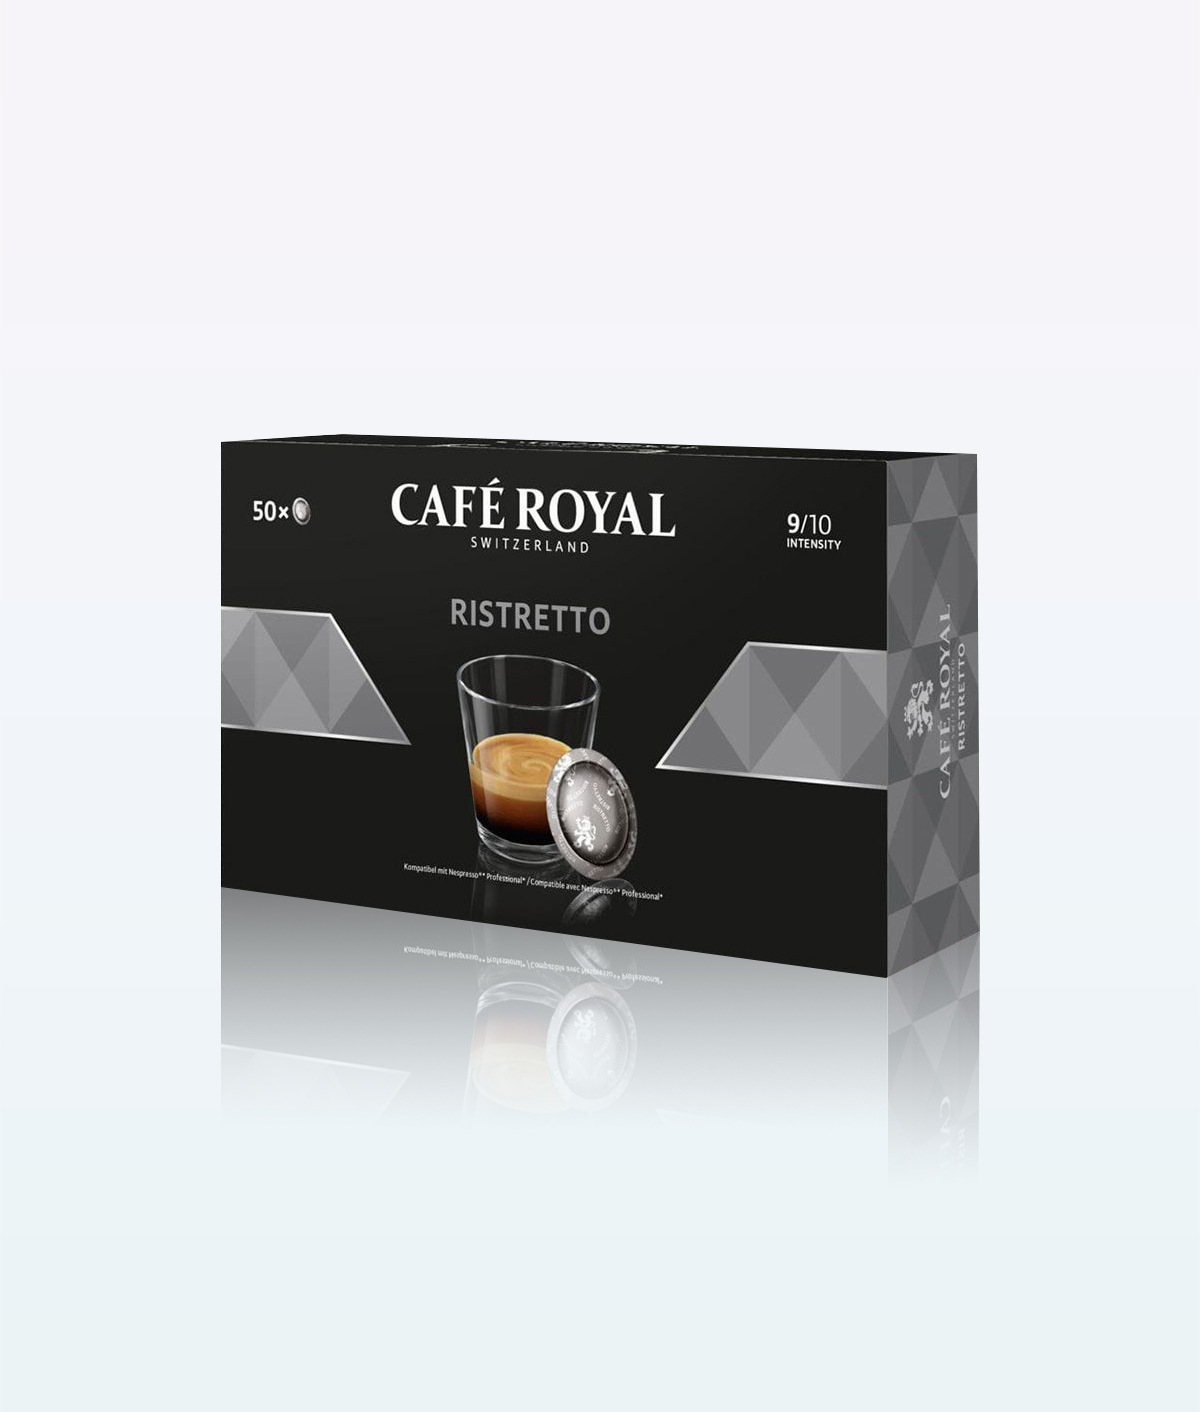 cafe-royal-ristretto-cafe-suisse